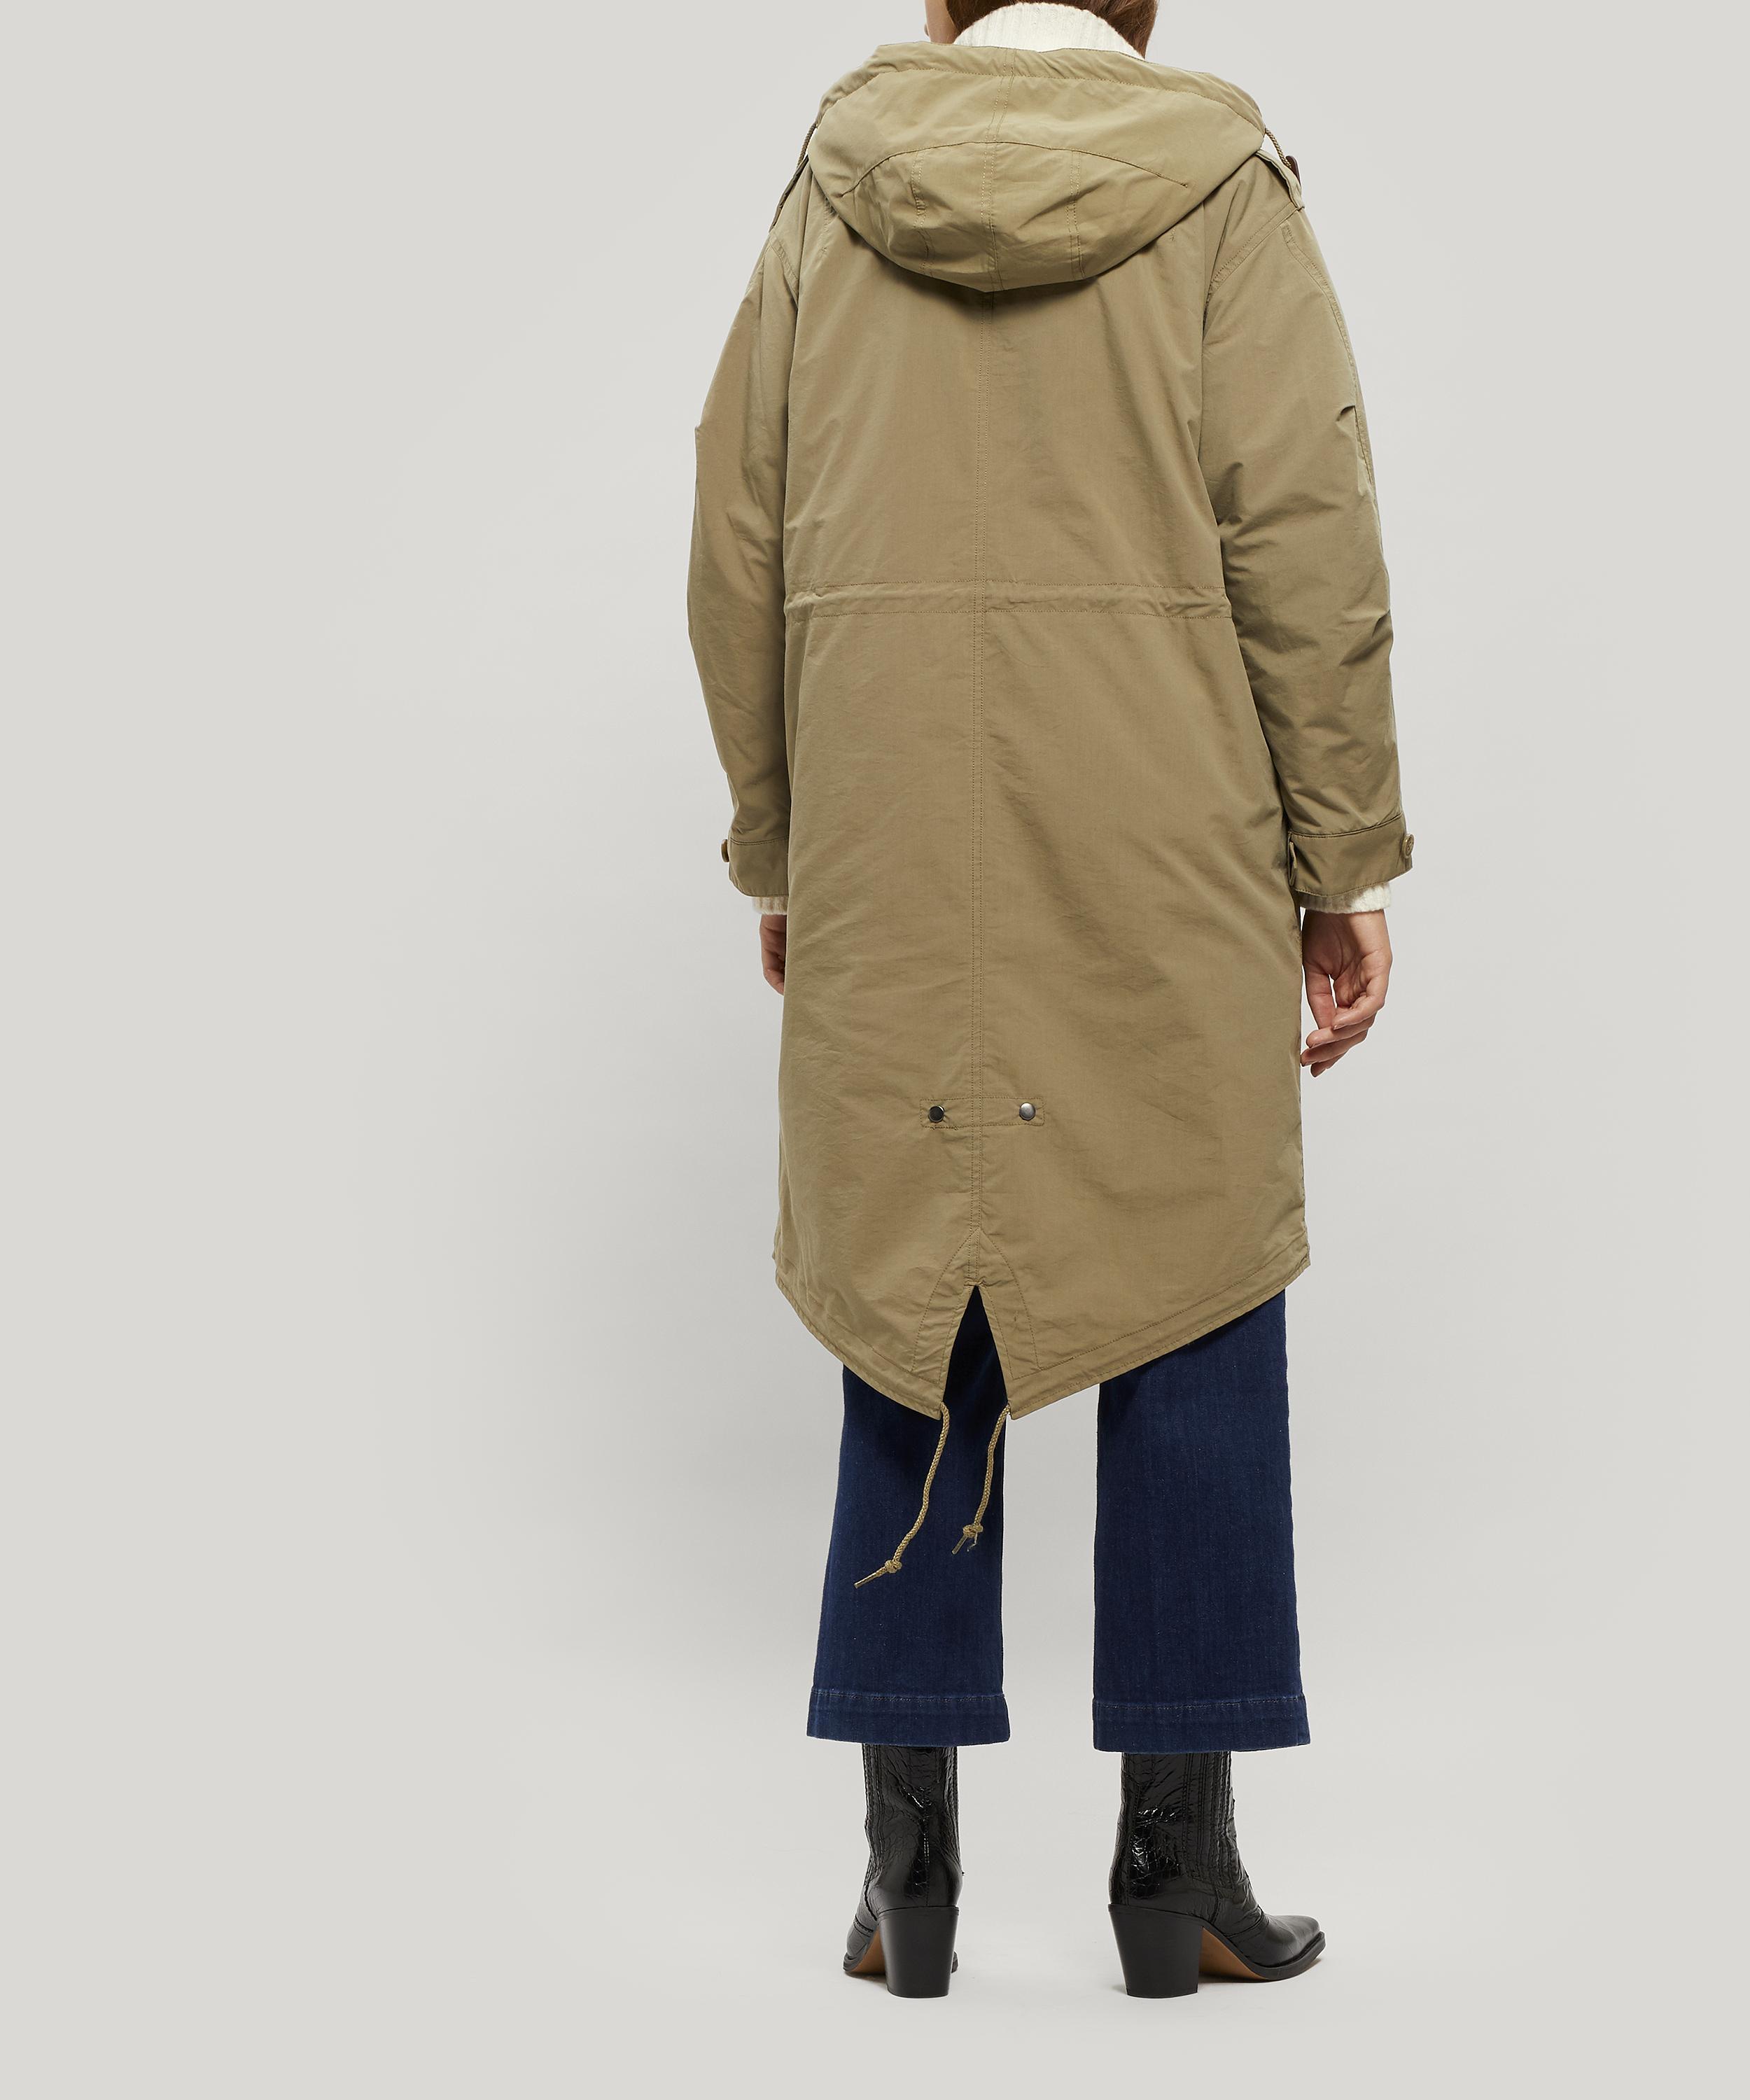 A.P.C. Cotton X Suzanne Koller Gertrude Parka in Khaki (Natural) - Lyst